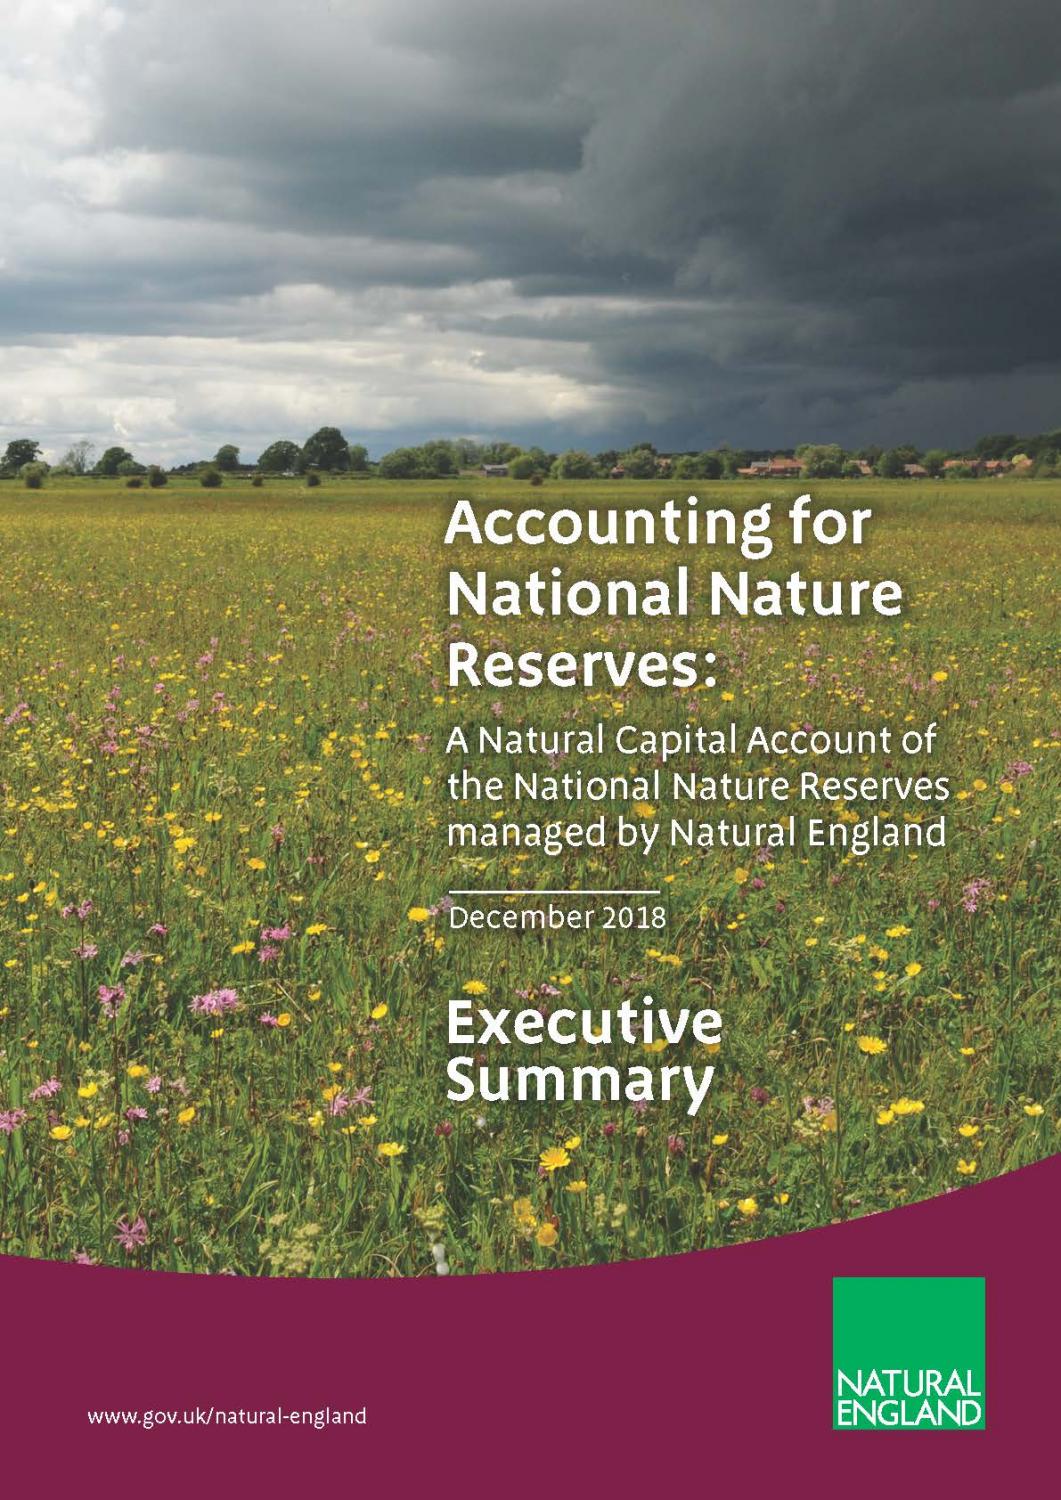 A Natural Capital Account of the National Nature Reserves managed by Natural England. Executive summary.